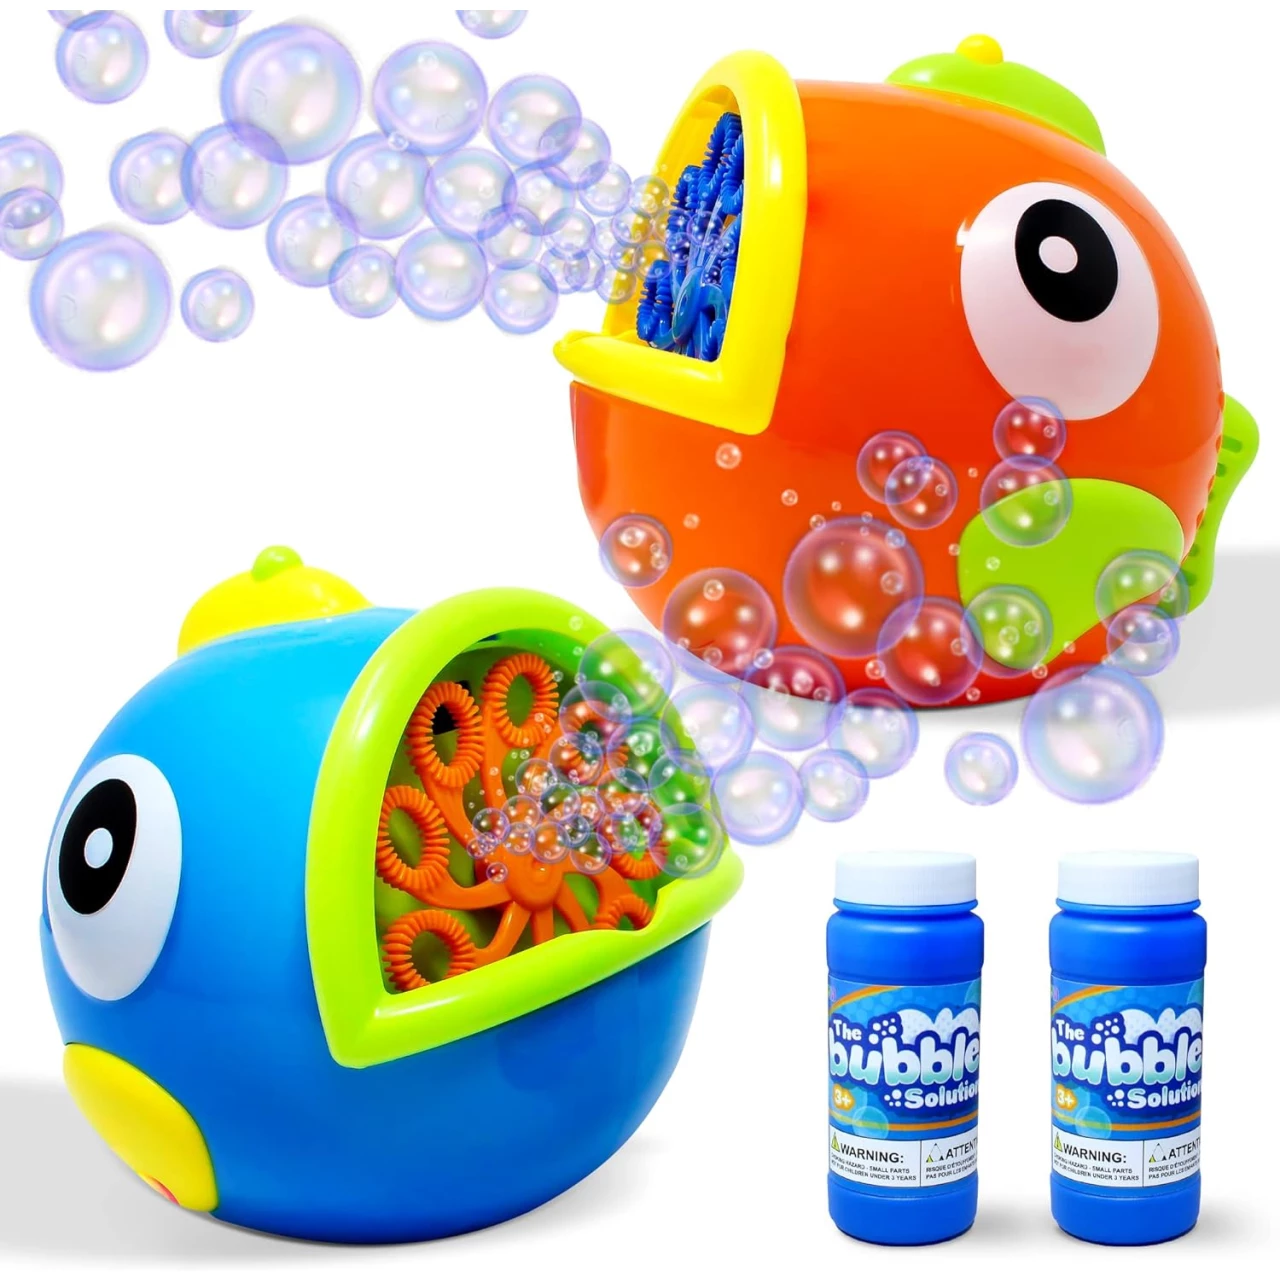 JOYIN 2 Pack Bubble Machines for Kids, Automatic Bubble Blowers, Bubble Makers, Bubbles Party Favors Supplies, Summer Toy, Outdoor/Indoor Activity Use, Birthday Gifts, Easter